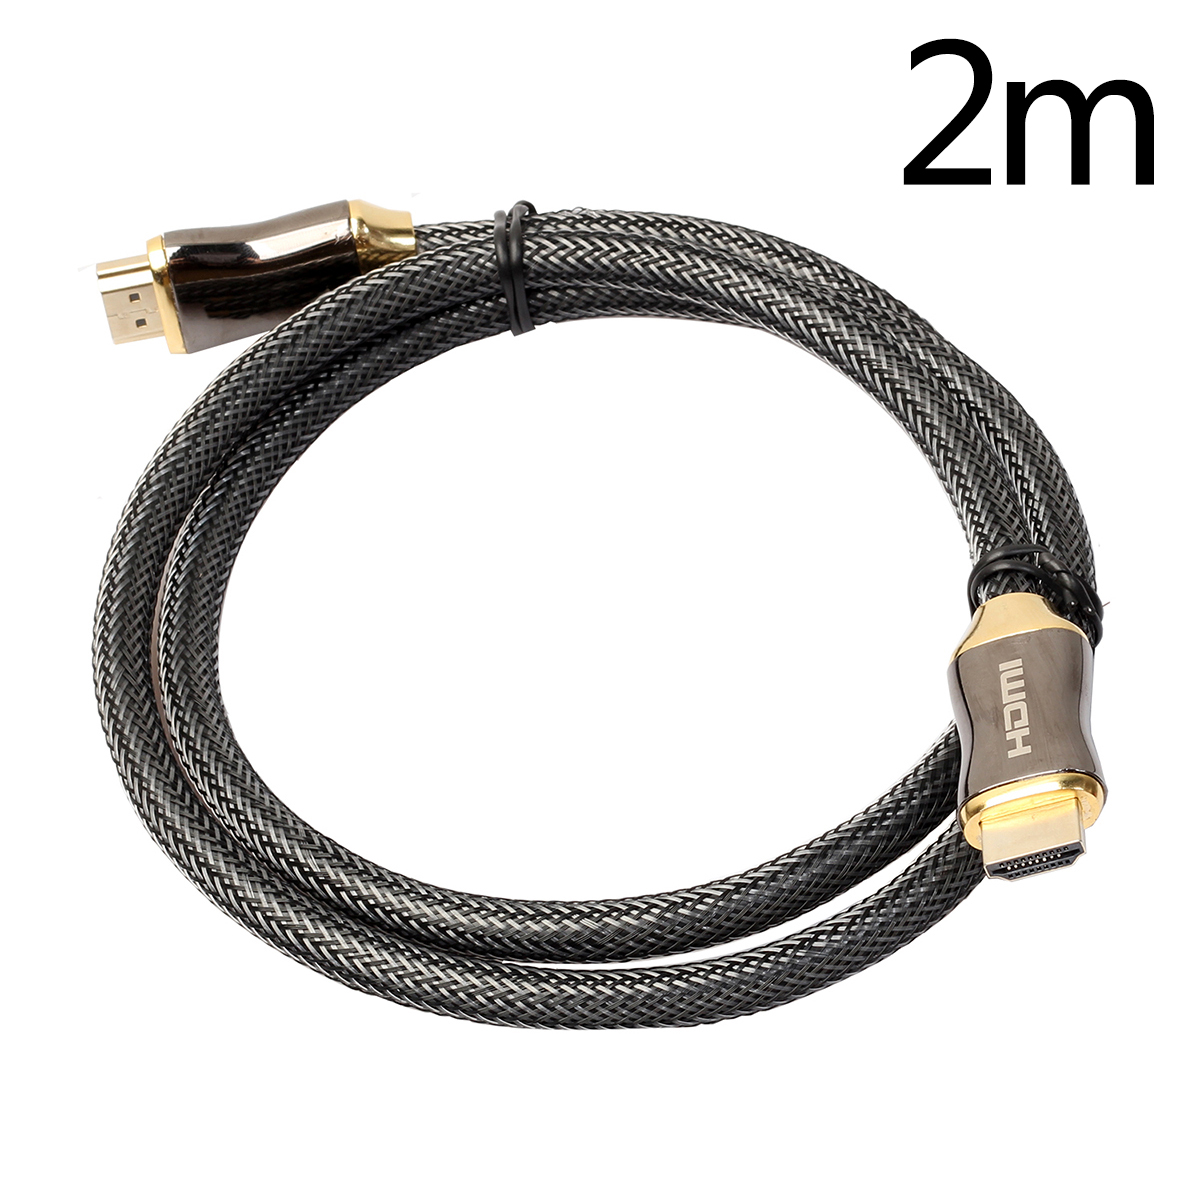 Braided Ultra HD HDMI Cable v2.0 High Speed Ethernet HDTV Cable 2M - Black